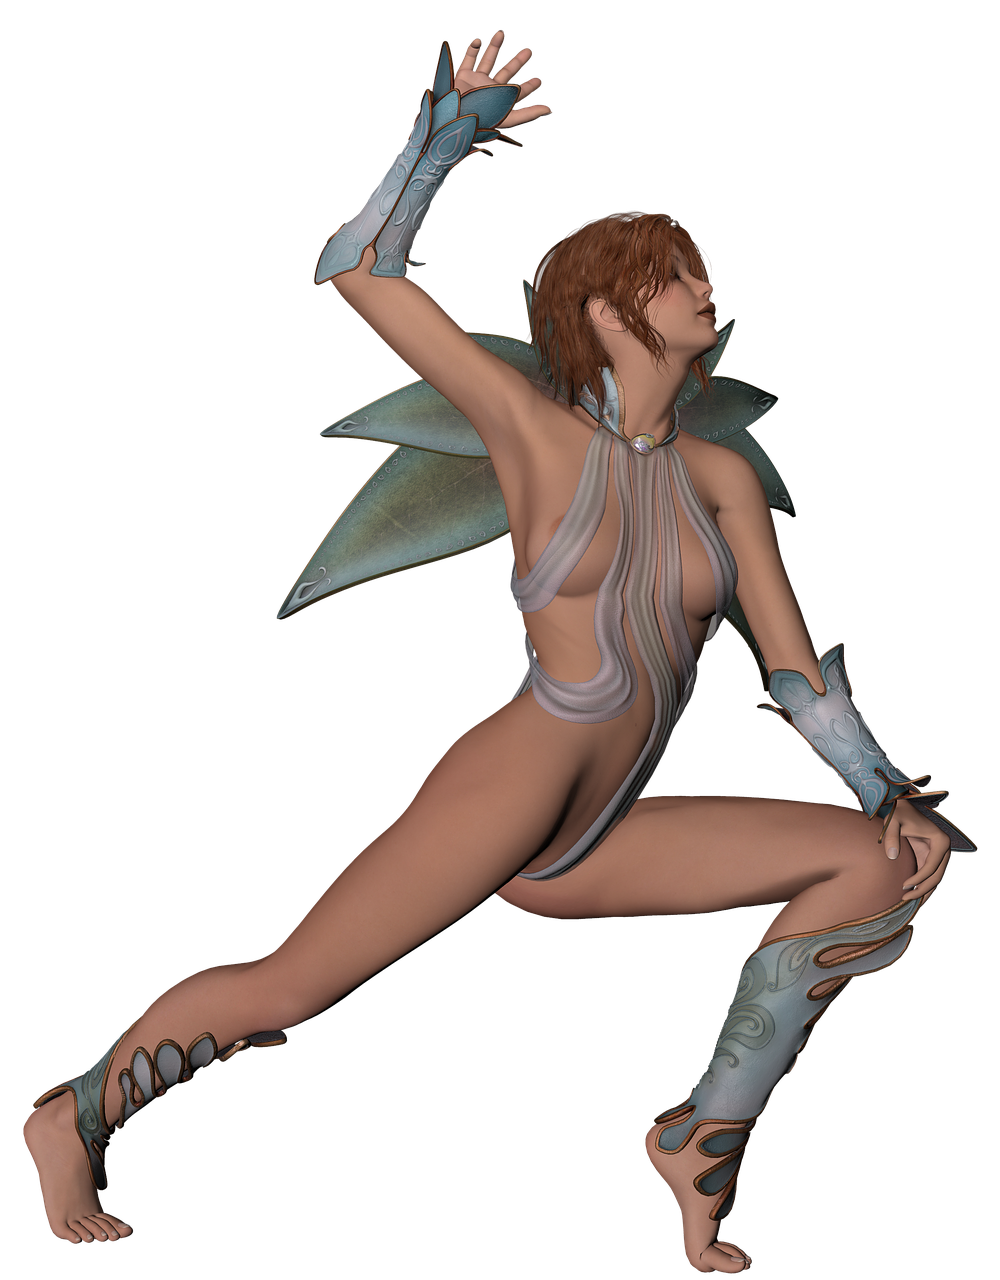 a close up of a person in a body suit, a raytraced image, fantasy art, brunette fairy woman stretching, modeled in poser, various posed, final fantasy 1 2 style